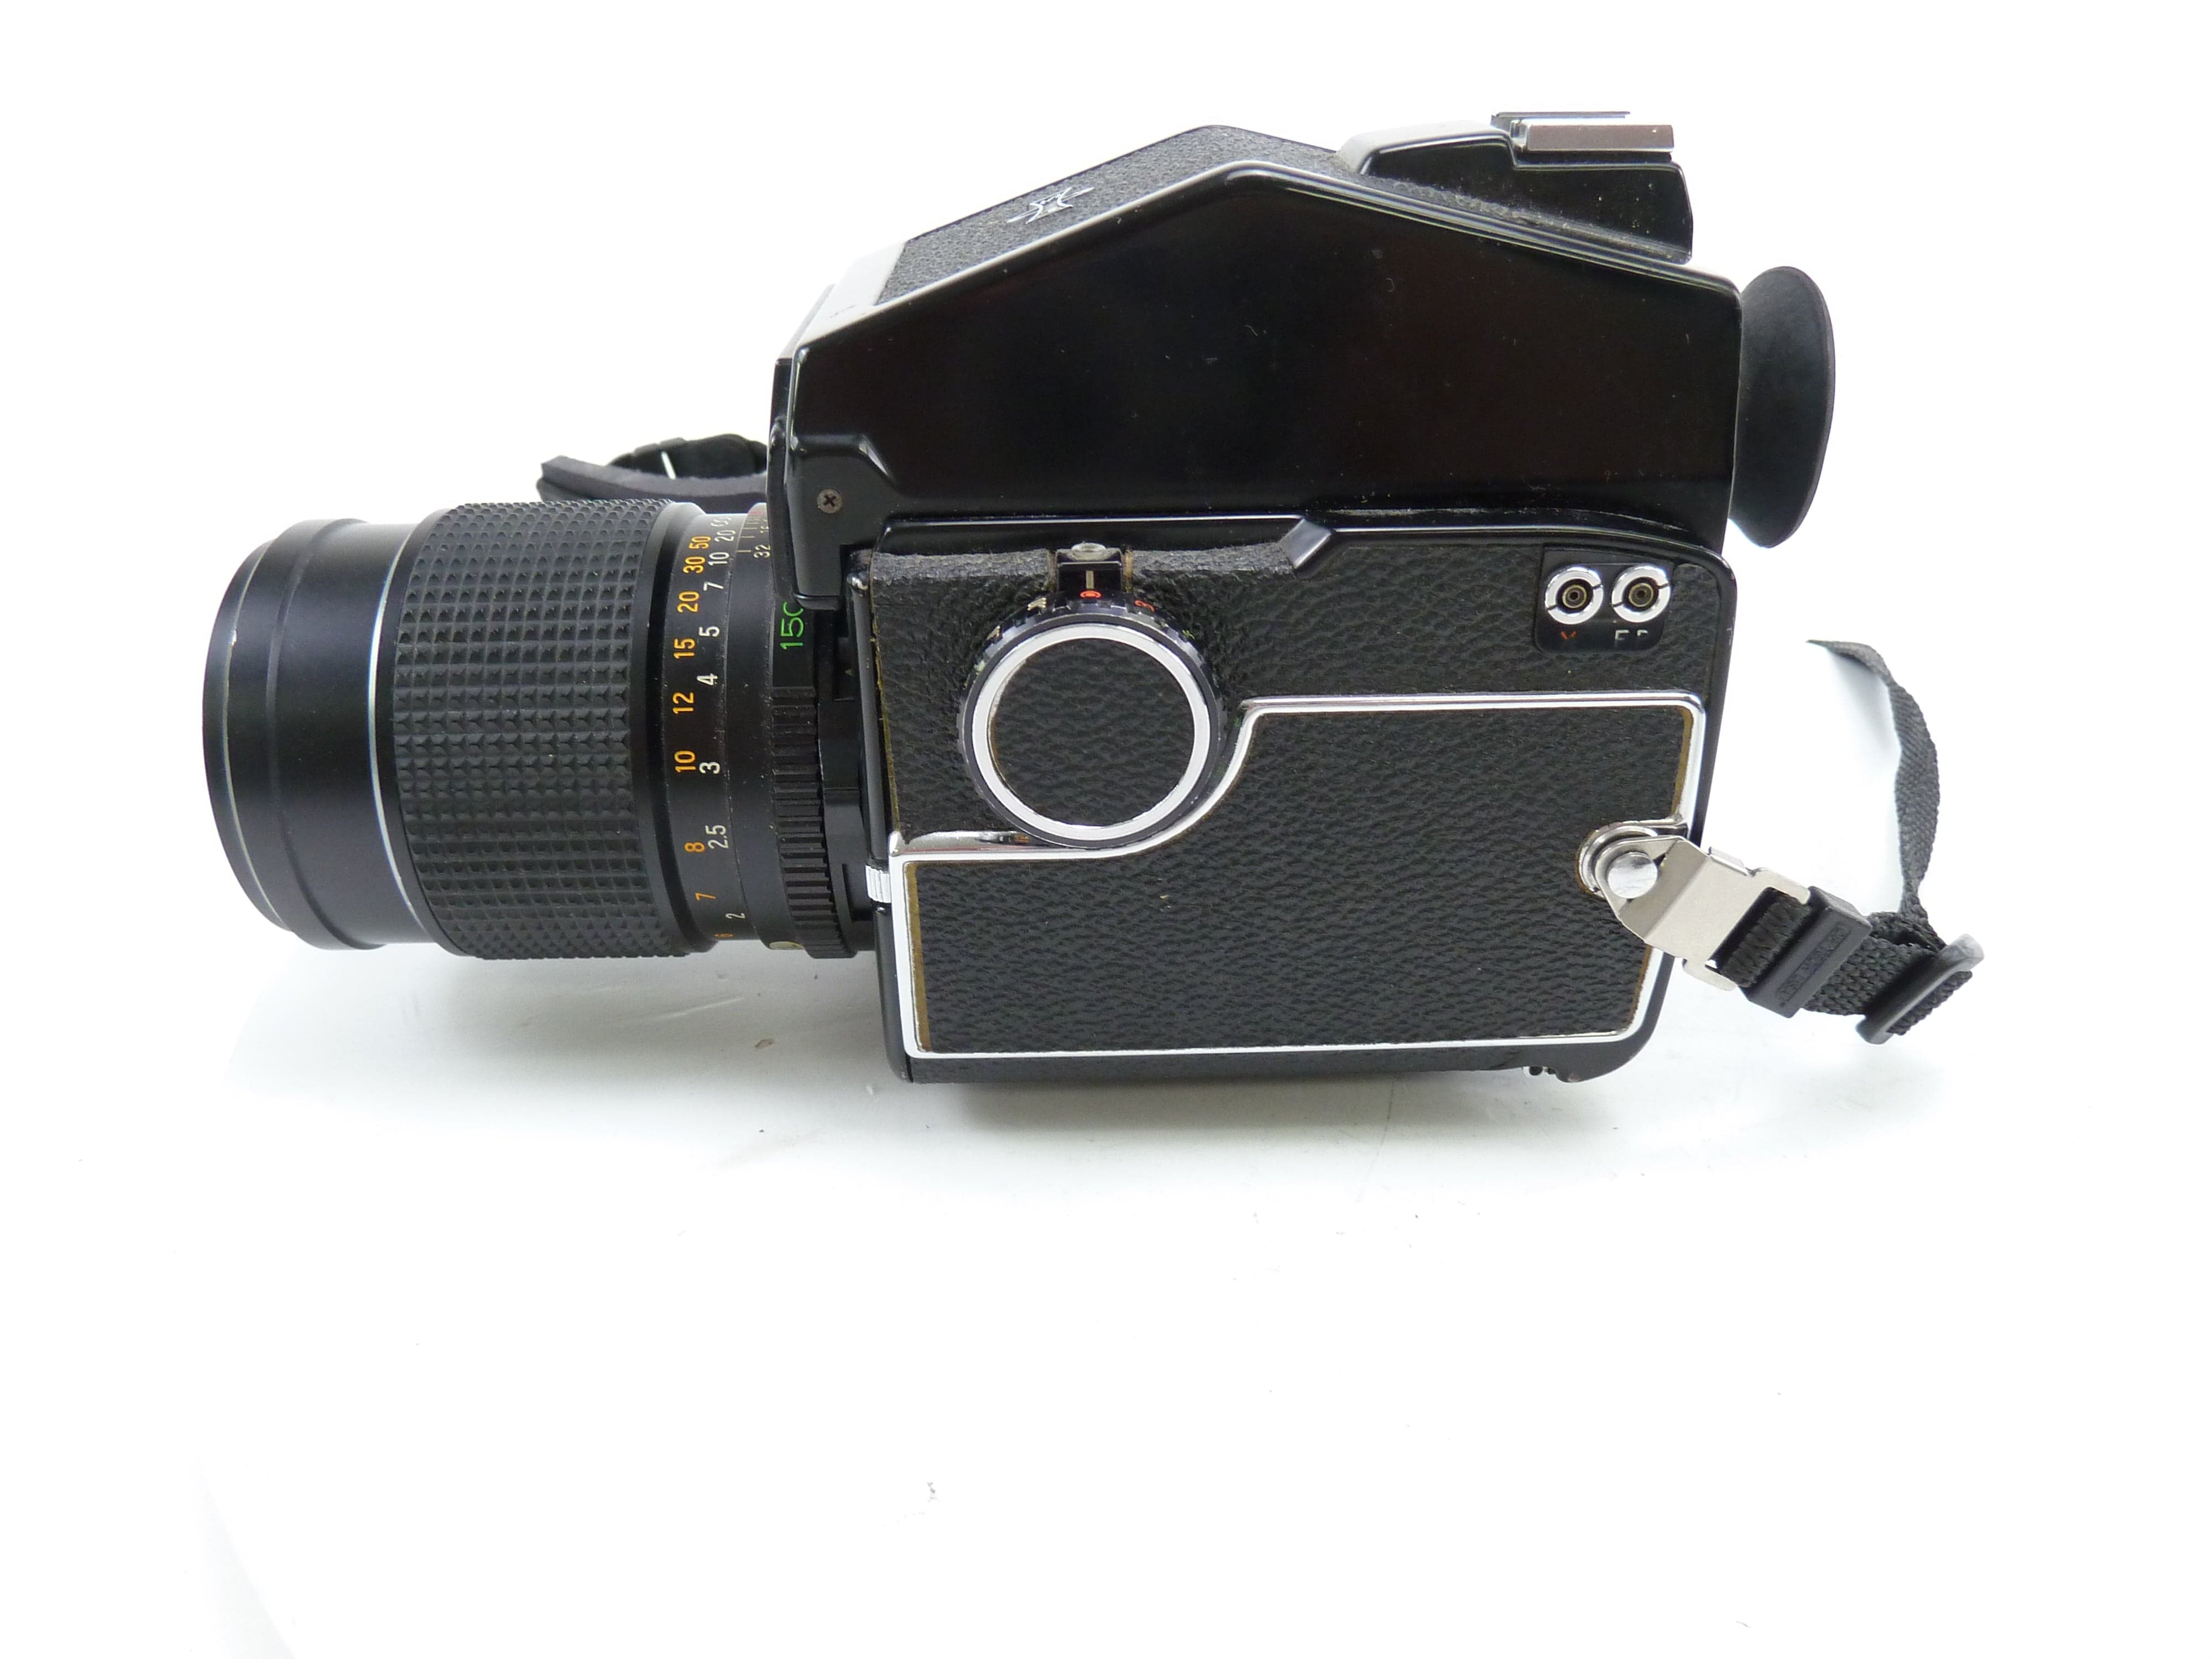 Mamiya M645 Outfit with 150MM F4 C Lens, PD Meter Prism Finder, and Strap